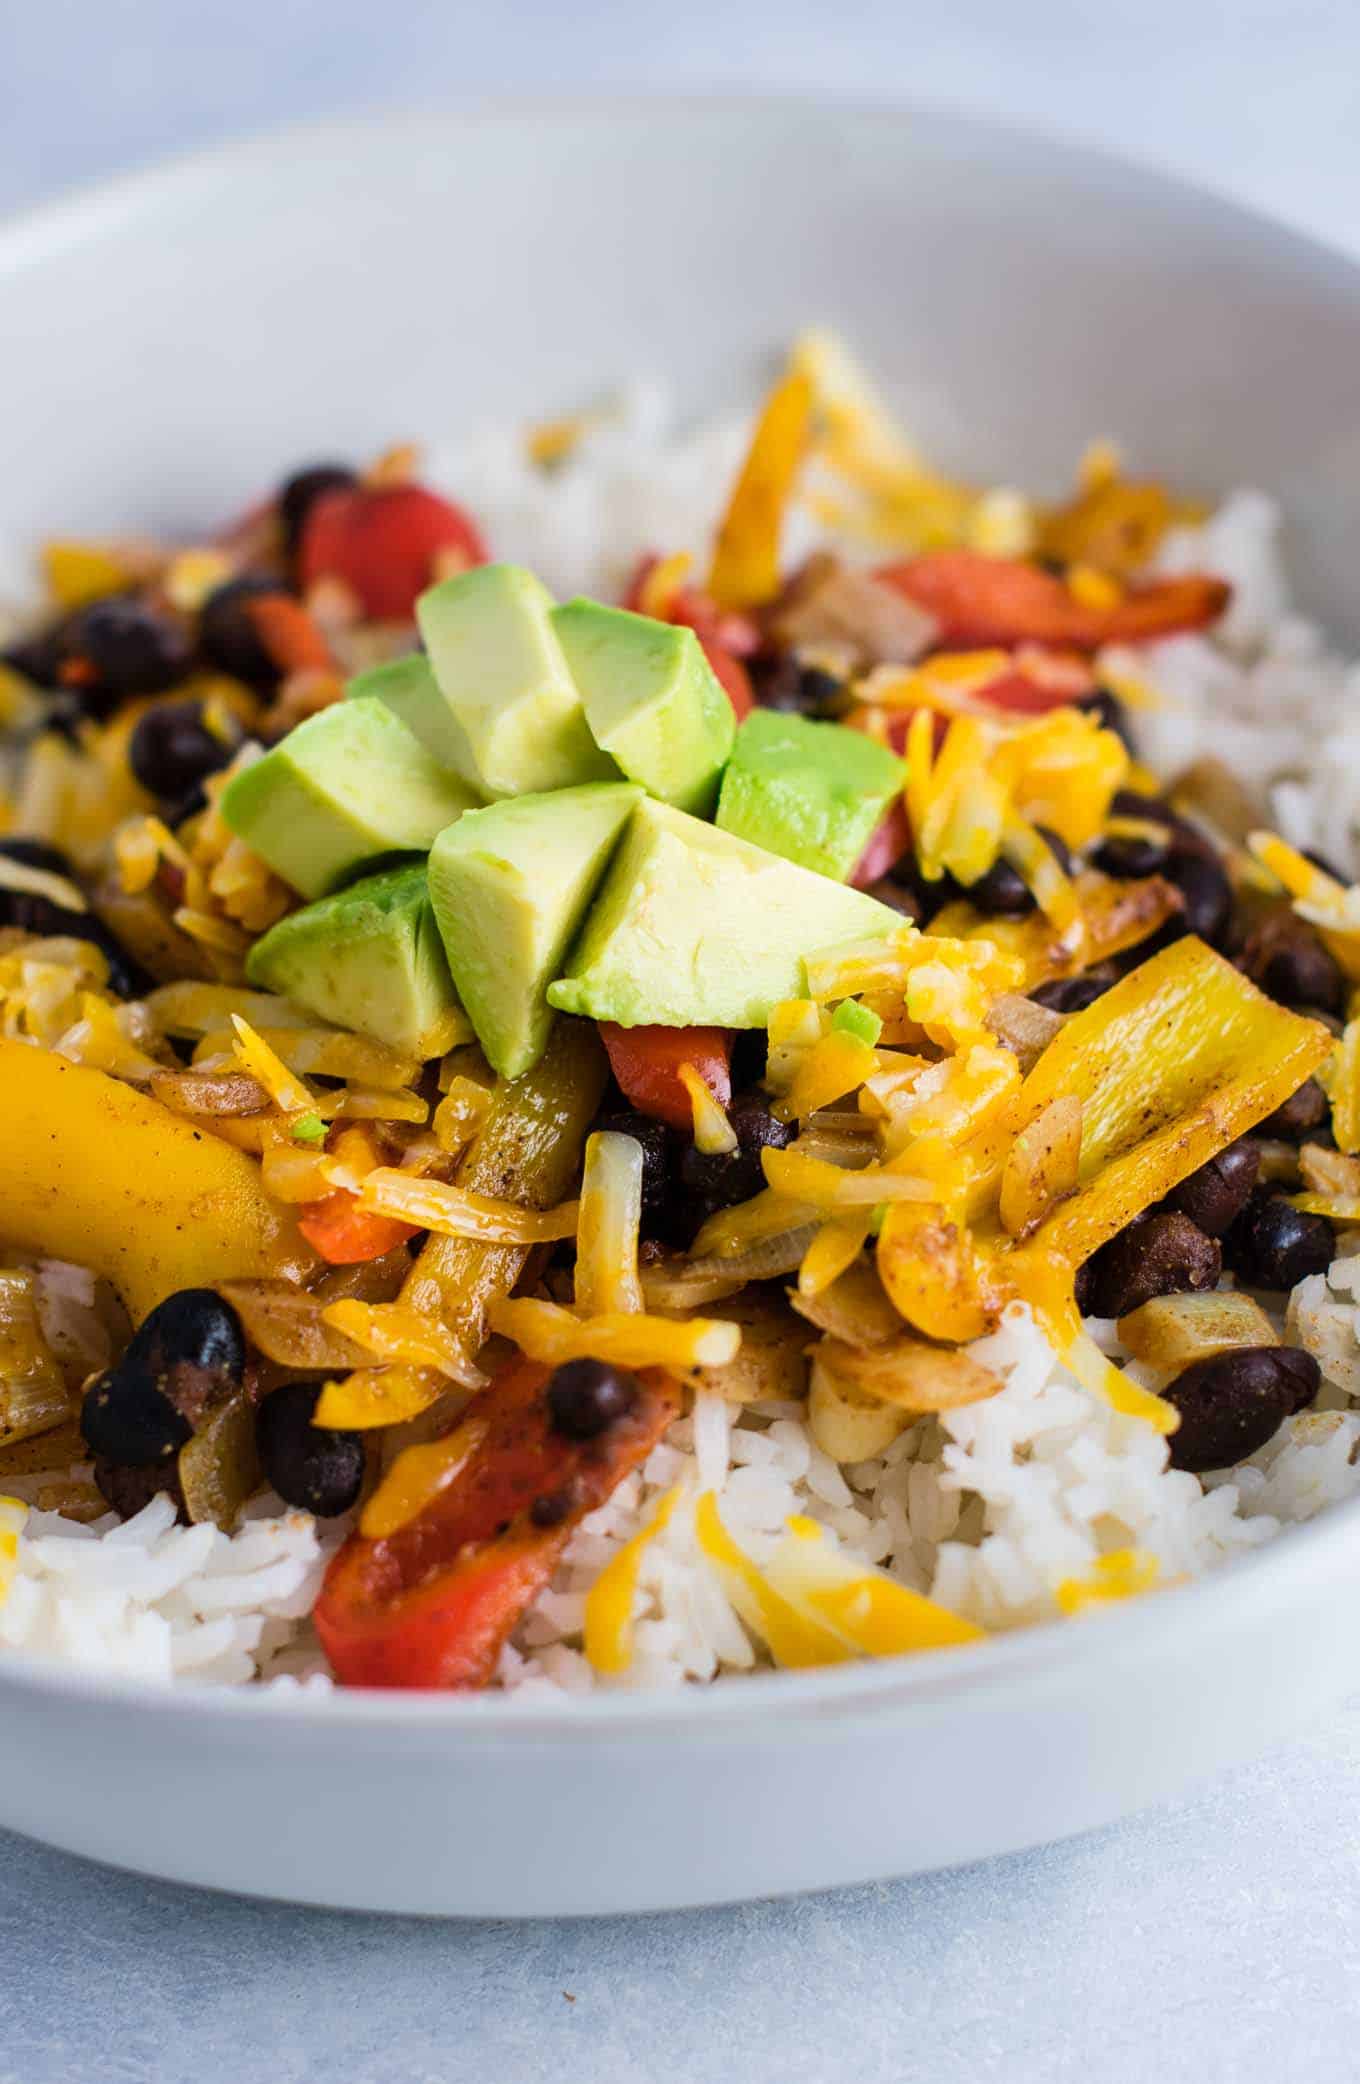 Vegetarian burrito bowl recipe with black beans, mini bell peppers, garlic, and onion. Better than chipotle! An easy vegetarian meal prep recipe or dinner the whole family will love! #vegetarianmealprep #vegetarianburritobowl #dinner #healthy #vegetarian